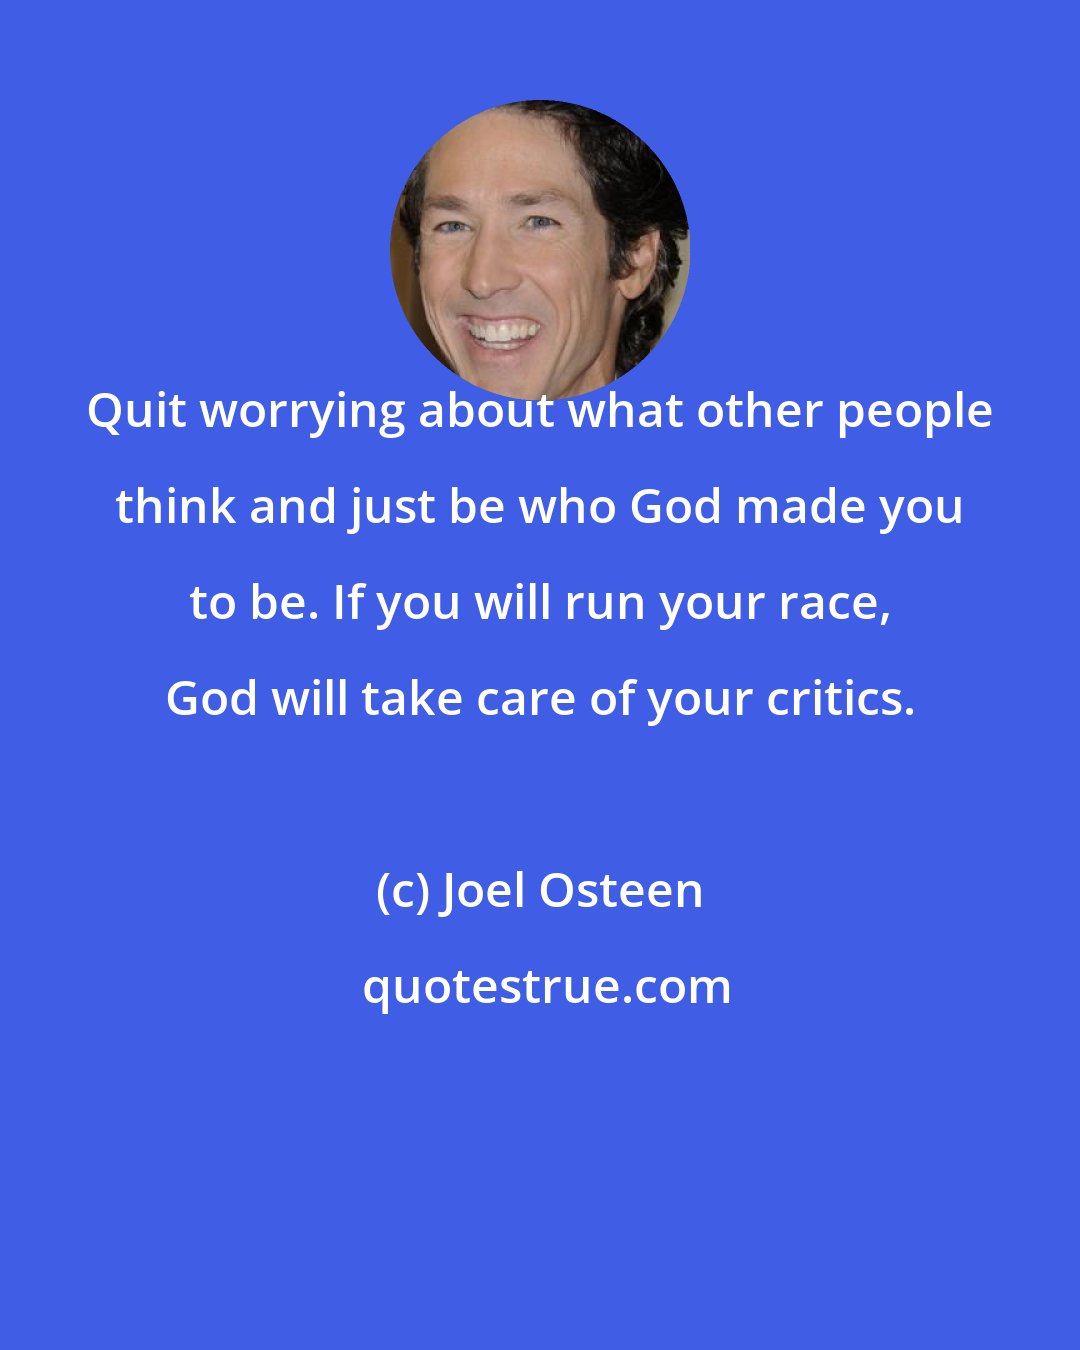 Joel Osteen: Quit worrying about what other people think and just be who God made you to be. If you will run your race, God will take care of your critics.